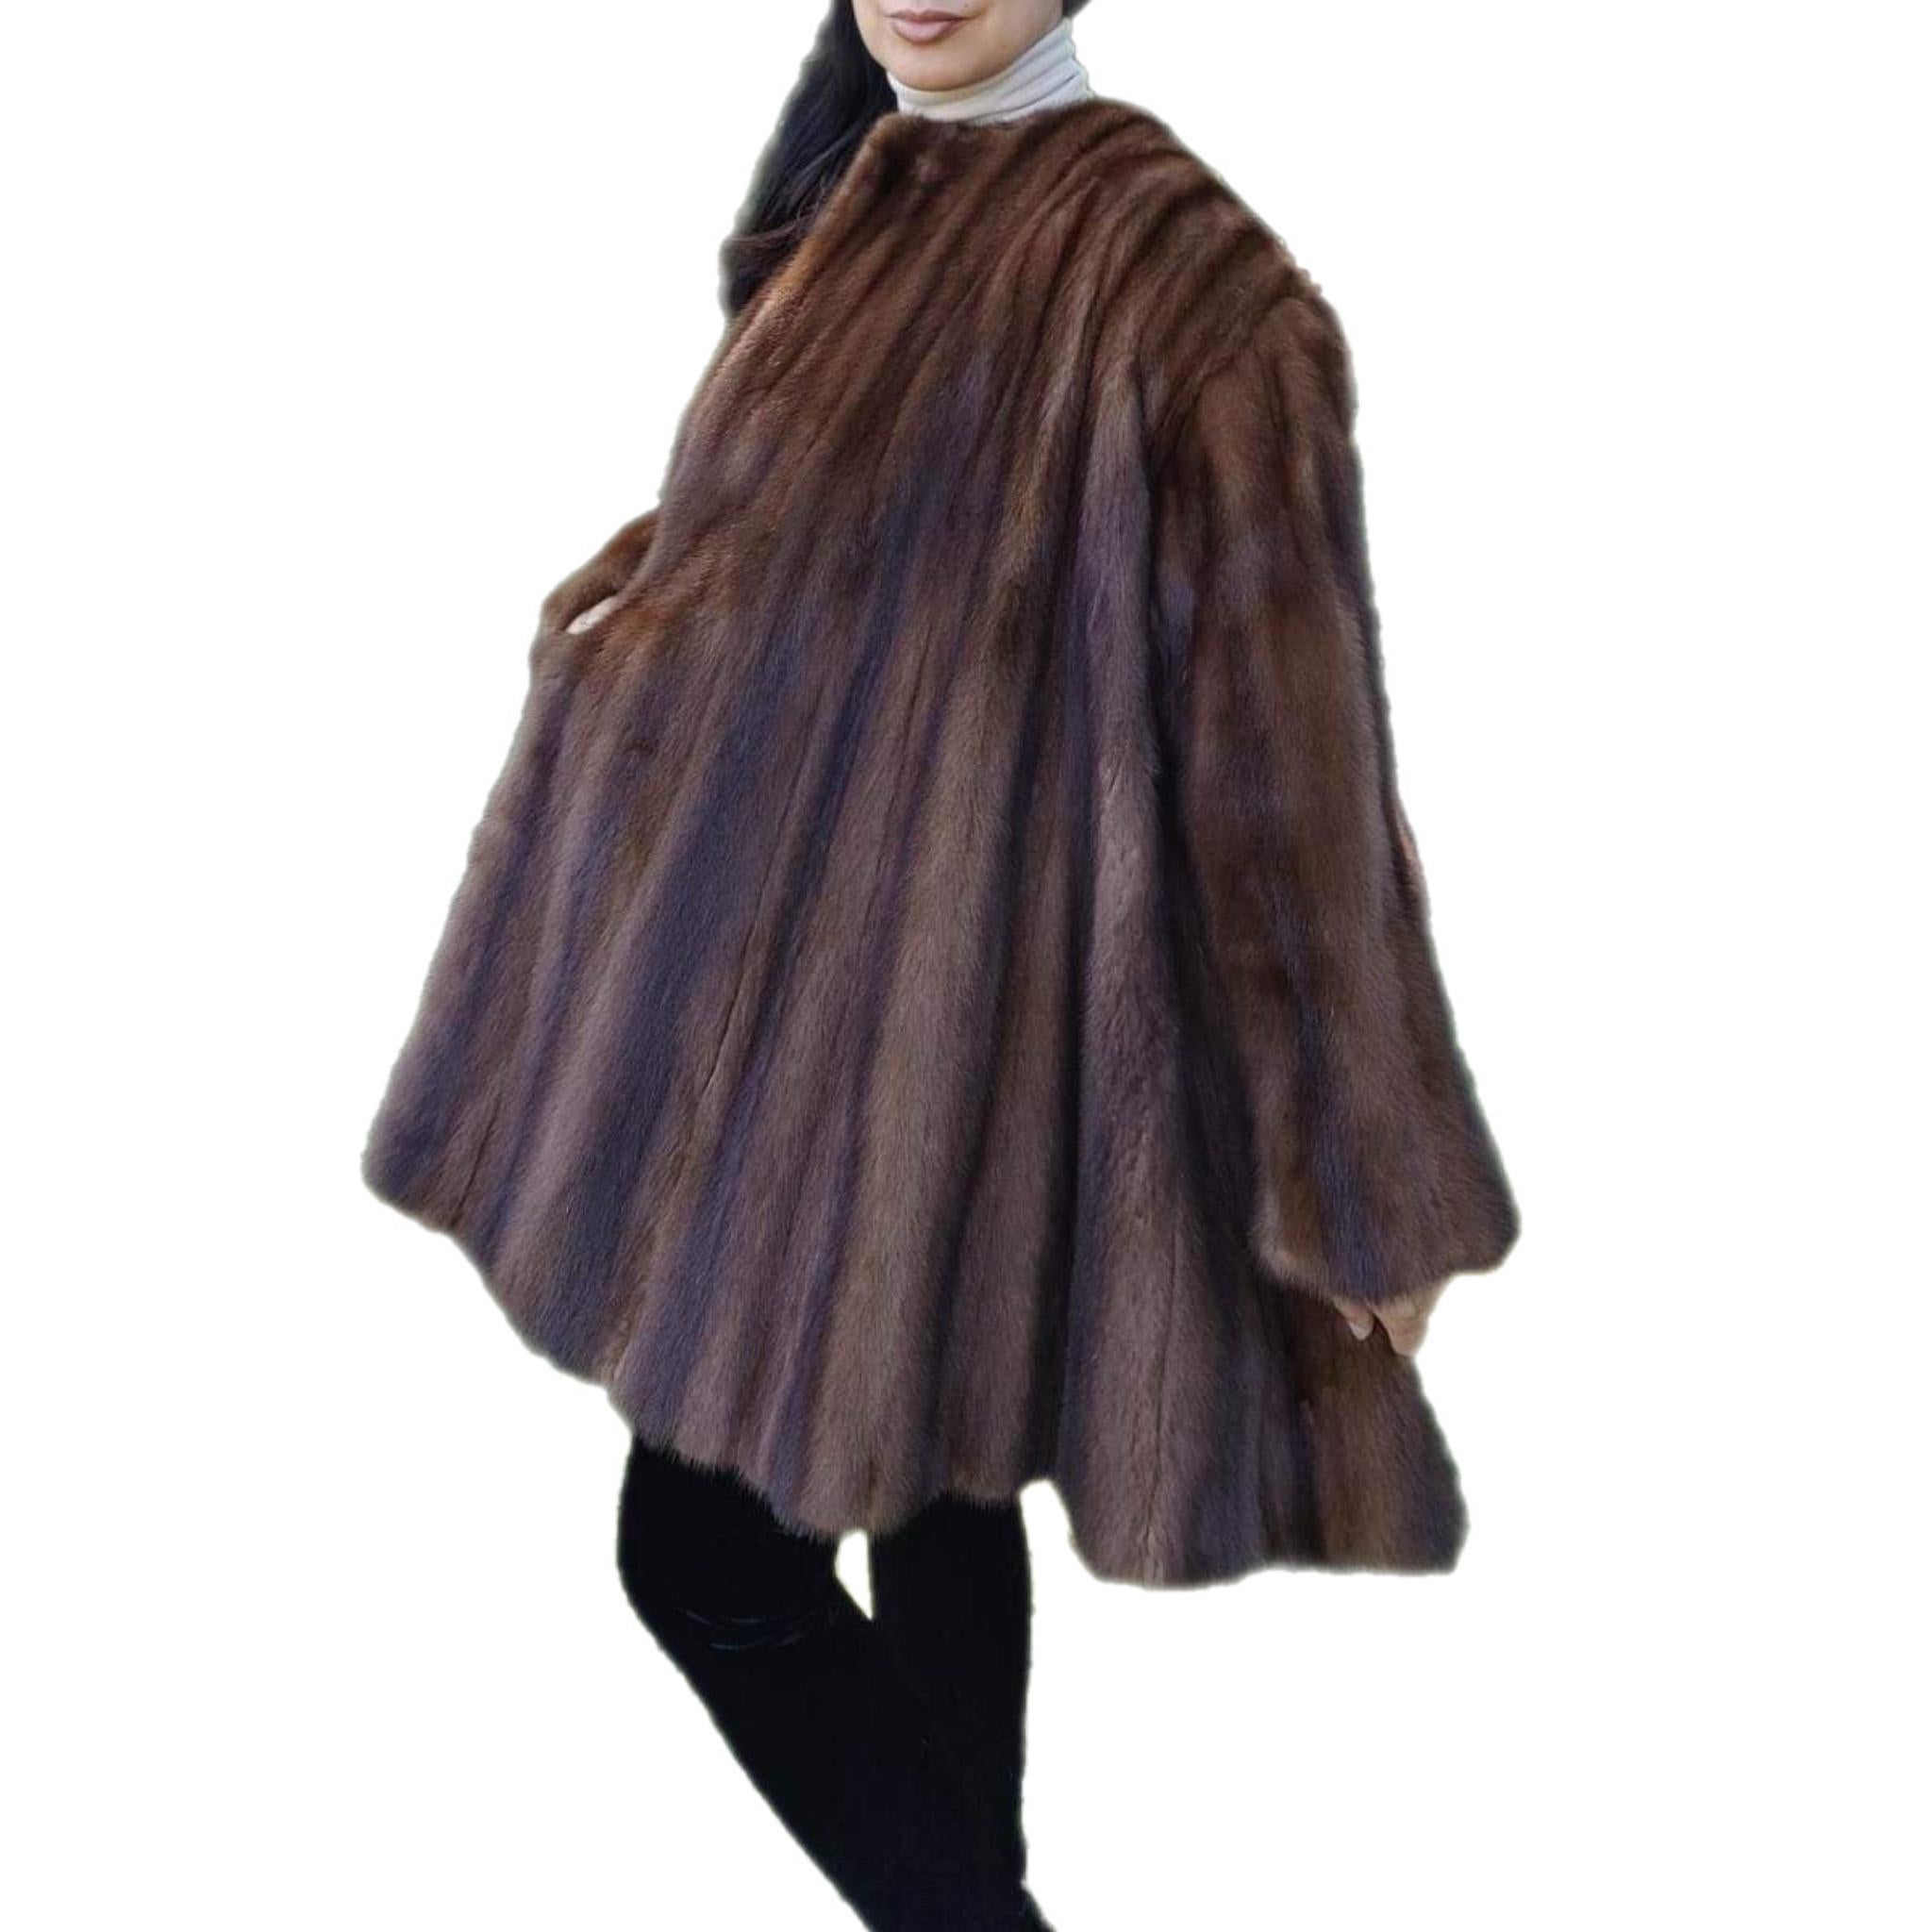 PRODUCT DESCRIPTION:

Unused Birger Christensen Demi Buff Swing wide Extra wide Sweep Mink Fur Coat (Size-24/2XL)

Renowned Birger Christensen  label, very wide sweep skirt, impeccable supple fur, vibrant Colors, 100% silk lining.

Condition: